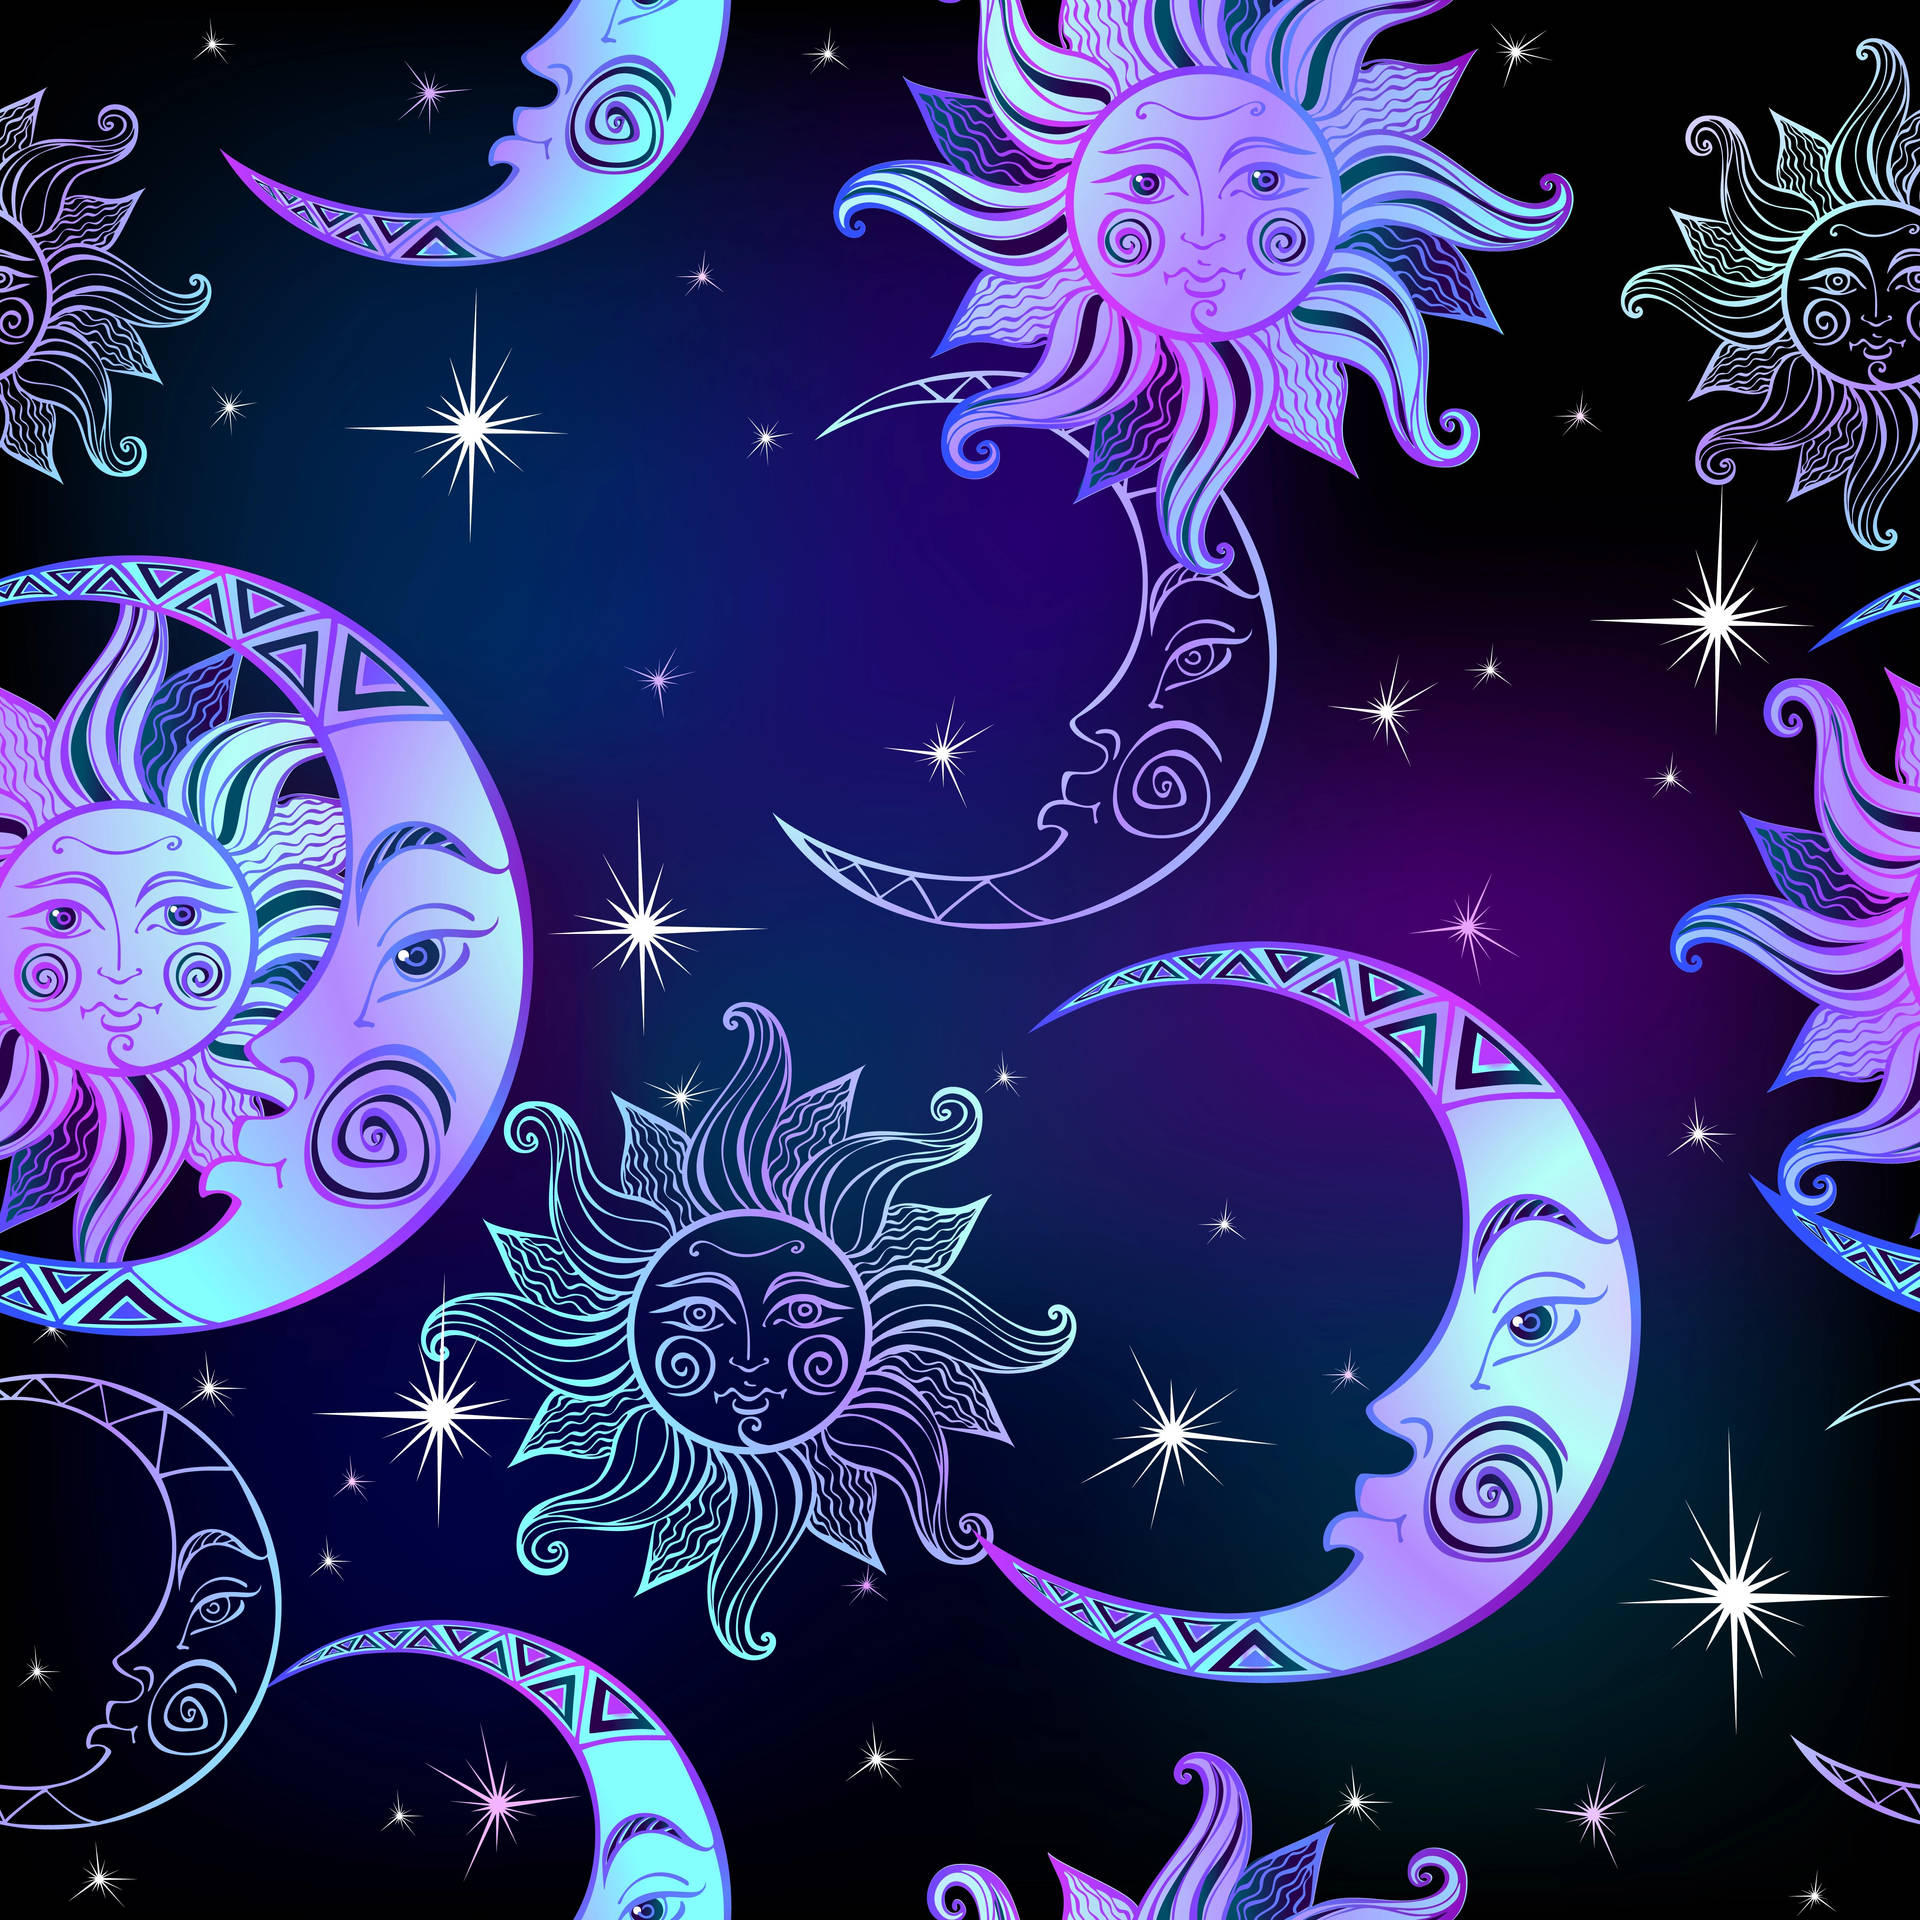 Sun Moon Stars Mobile Background Images  Free Photos PNG Stickers  Wallpapers  Backgrounds  rawpixel